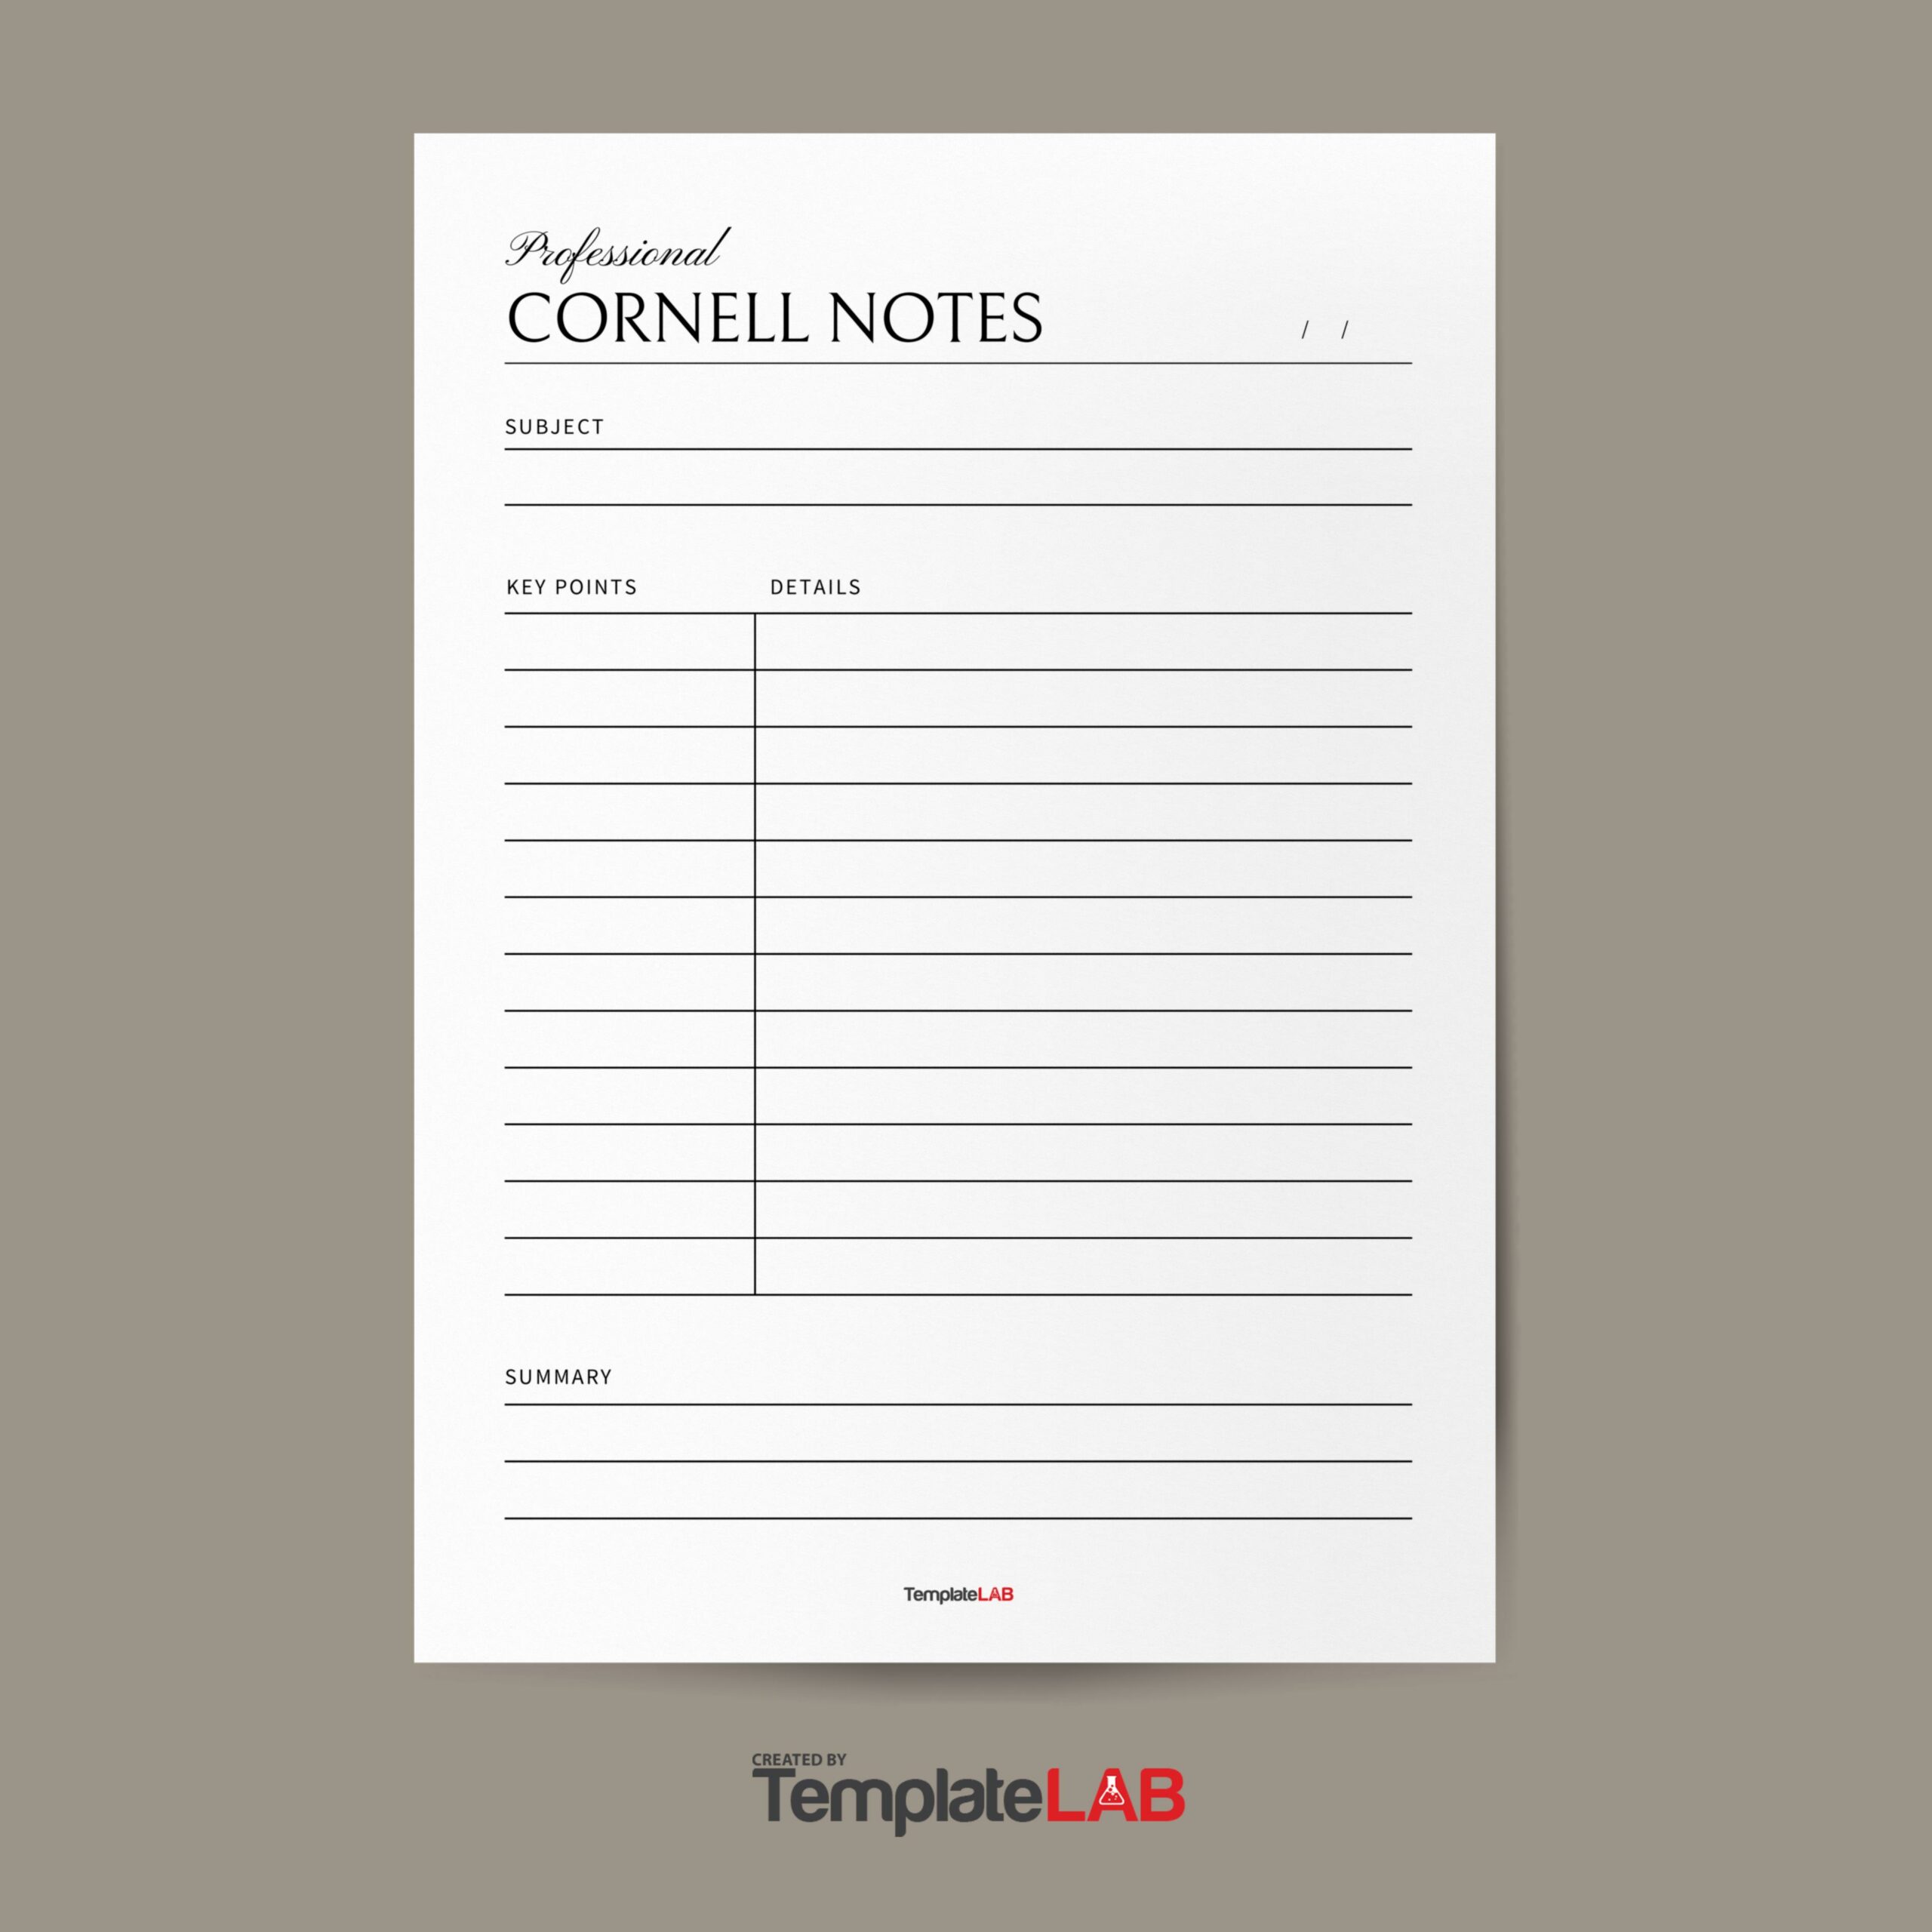 Free Professional Cornell Notes Template